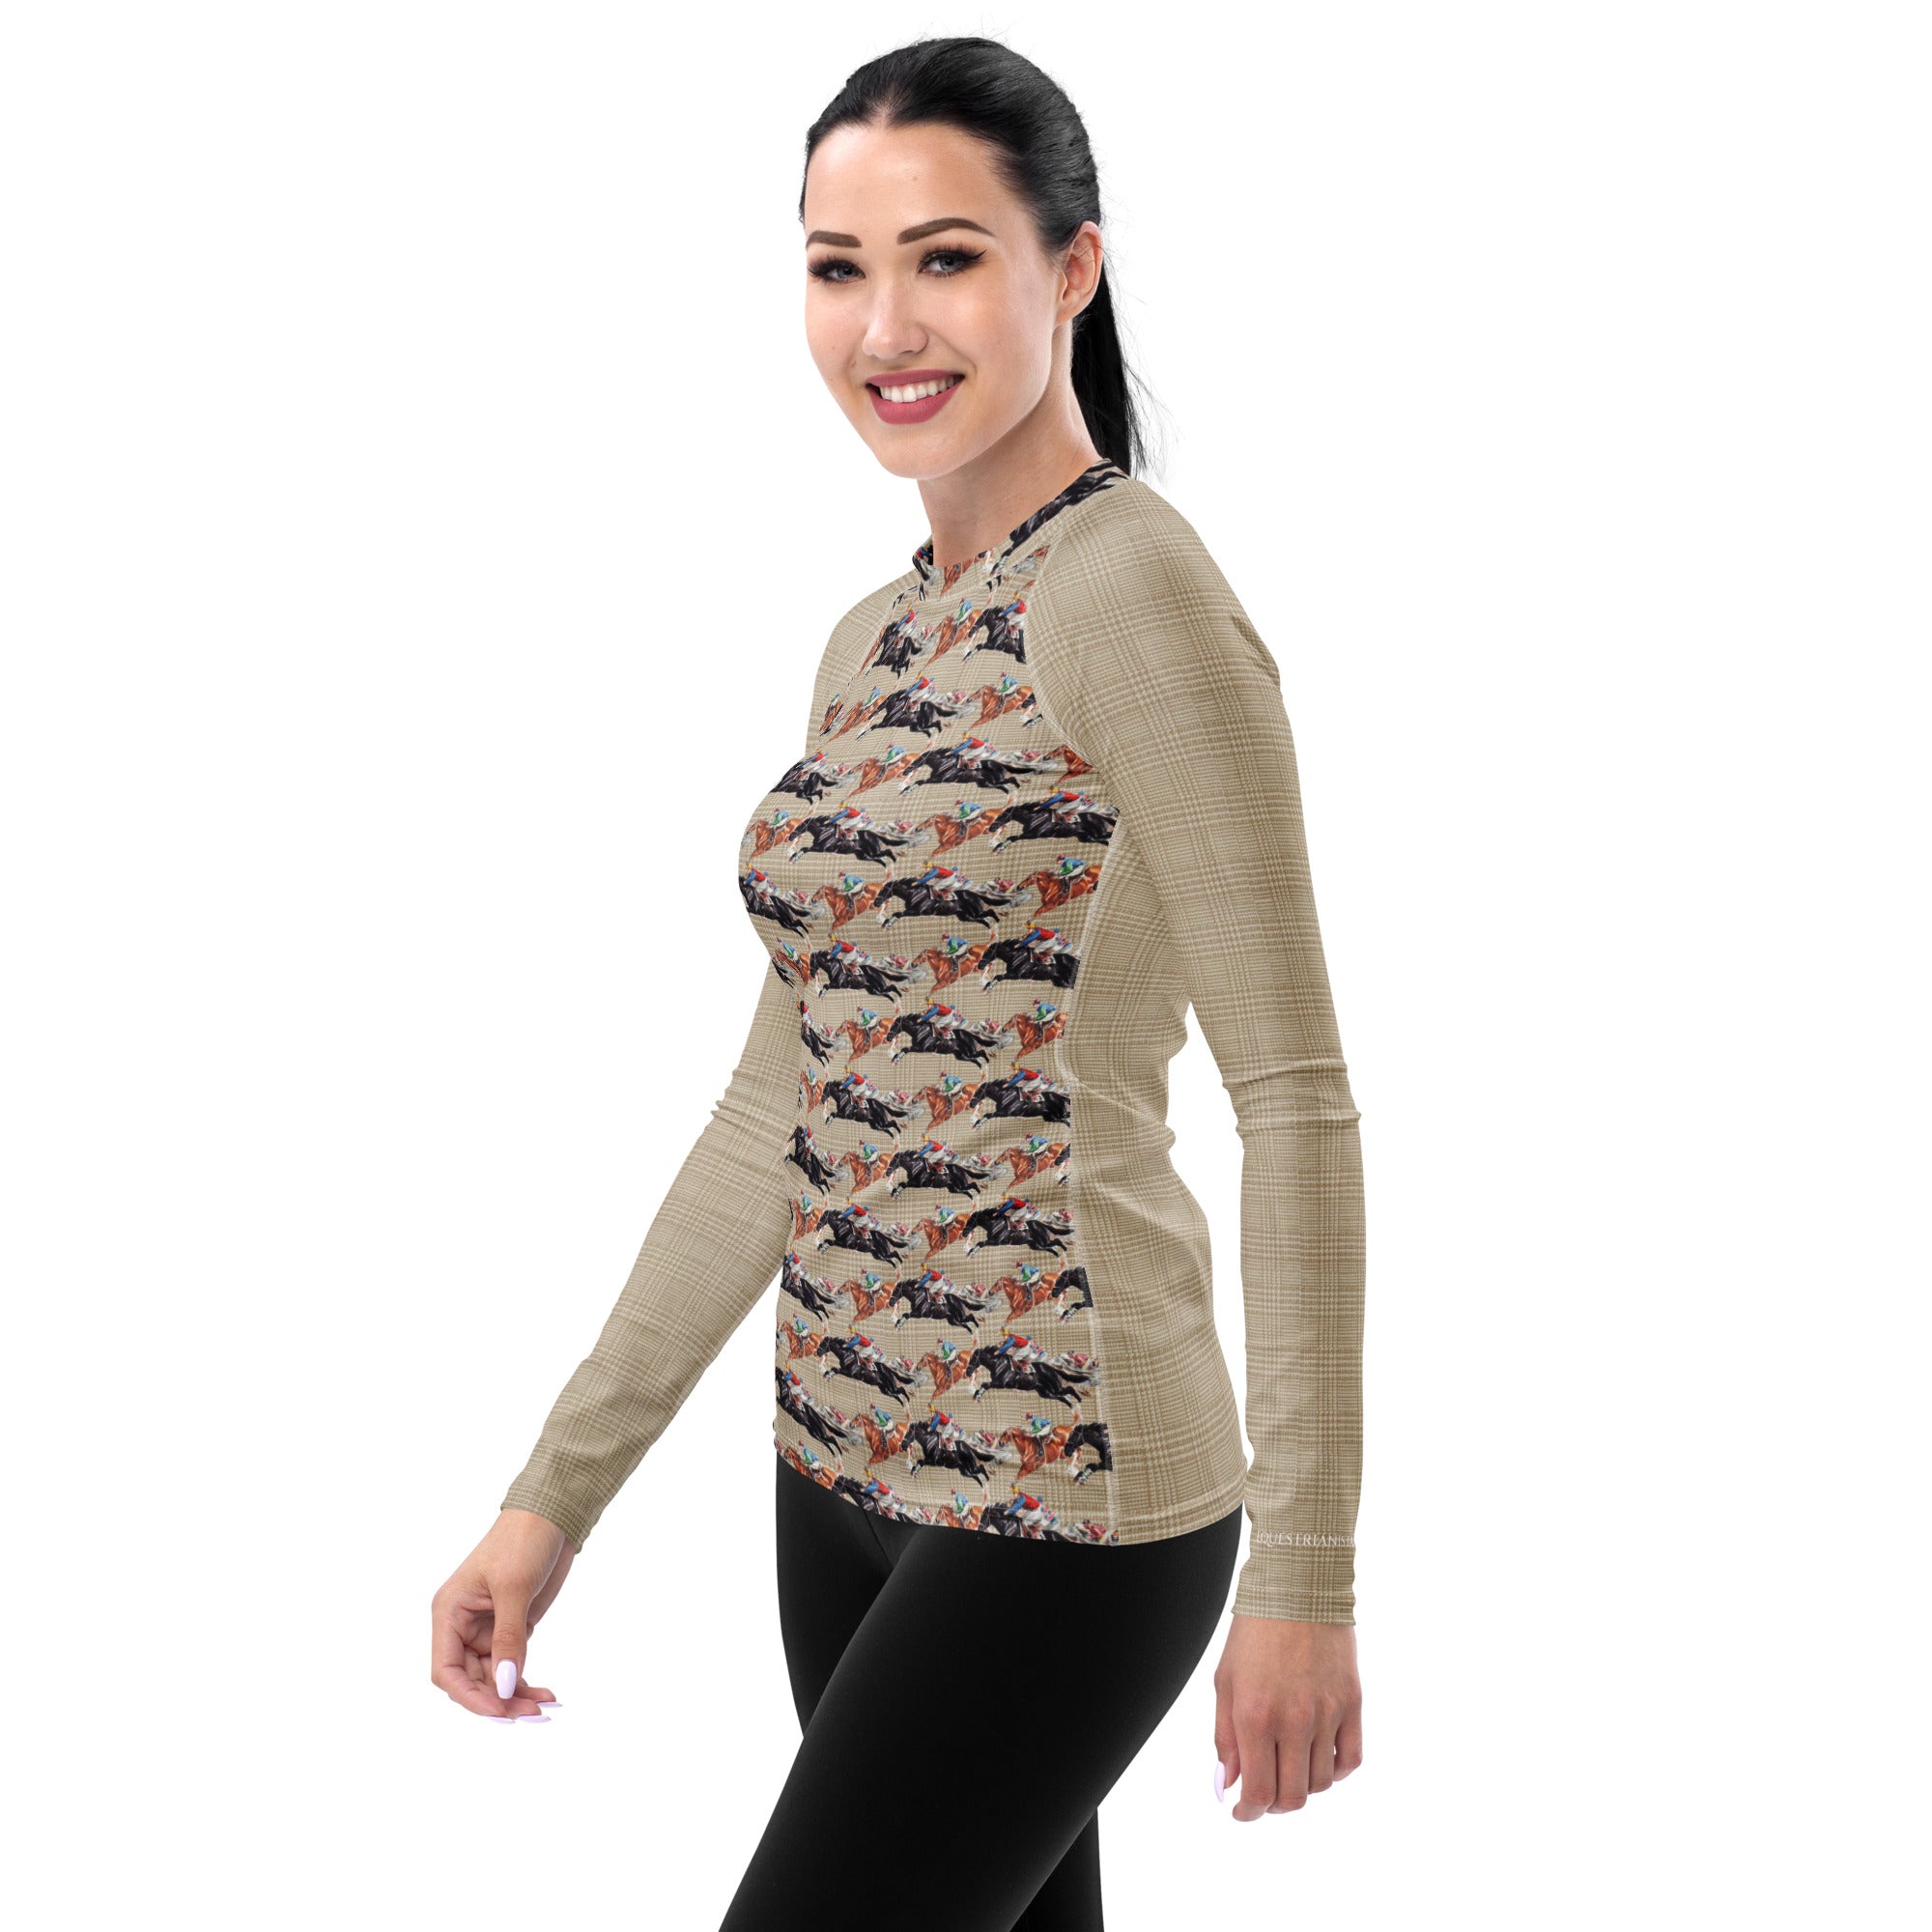 Women's Steeplechase Sunshirt Base Layer in Beige by EQUESTRIANISTA Brand Apparel and Accessories.